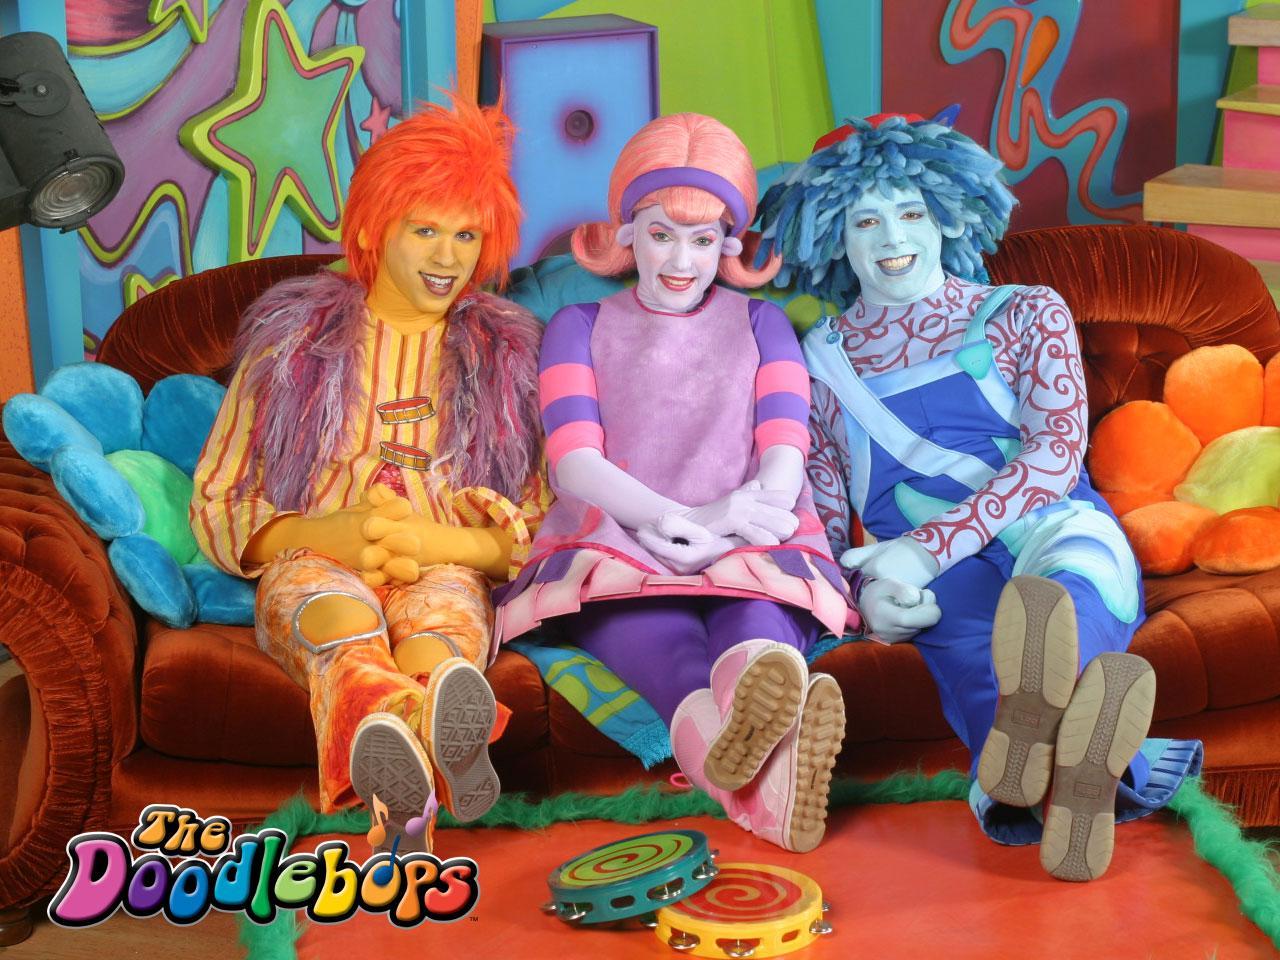 play the doodlebops games